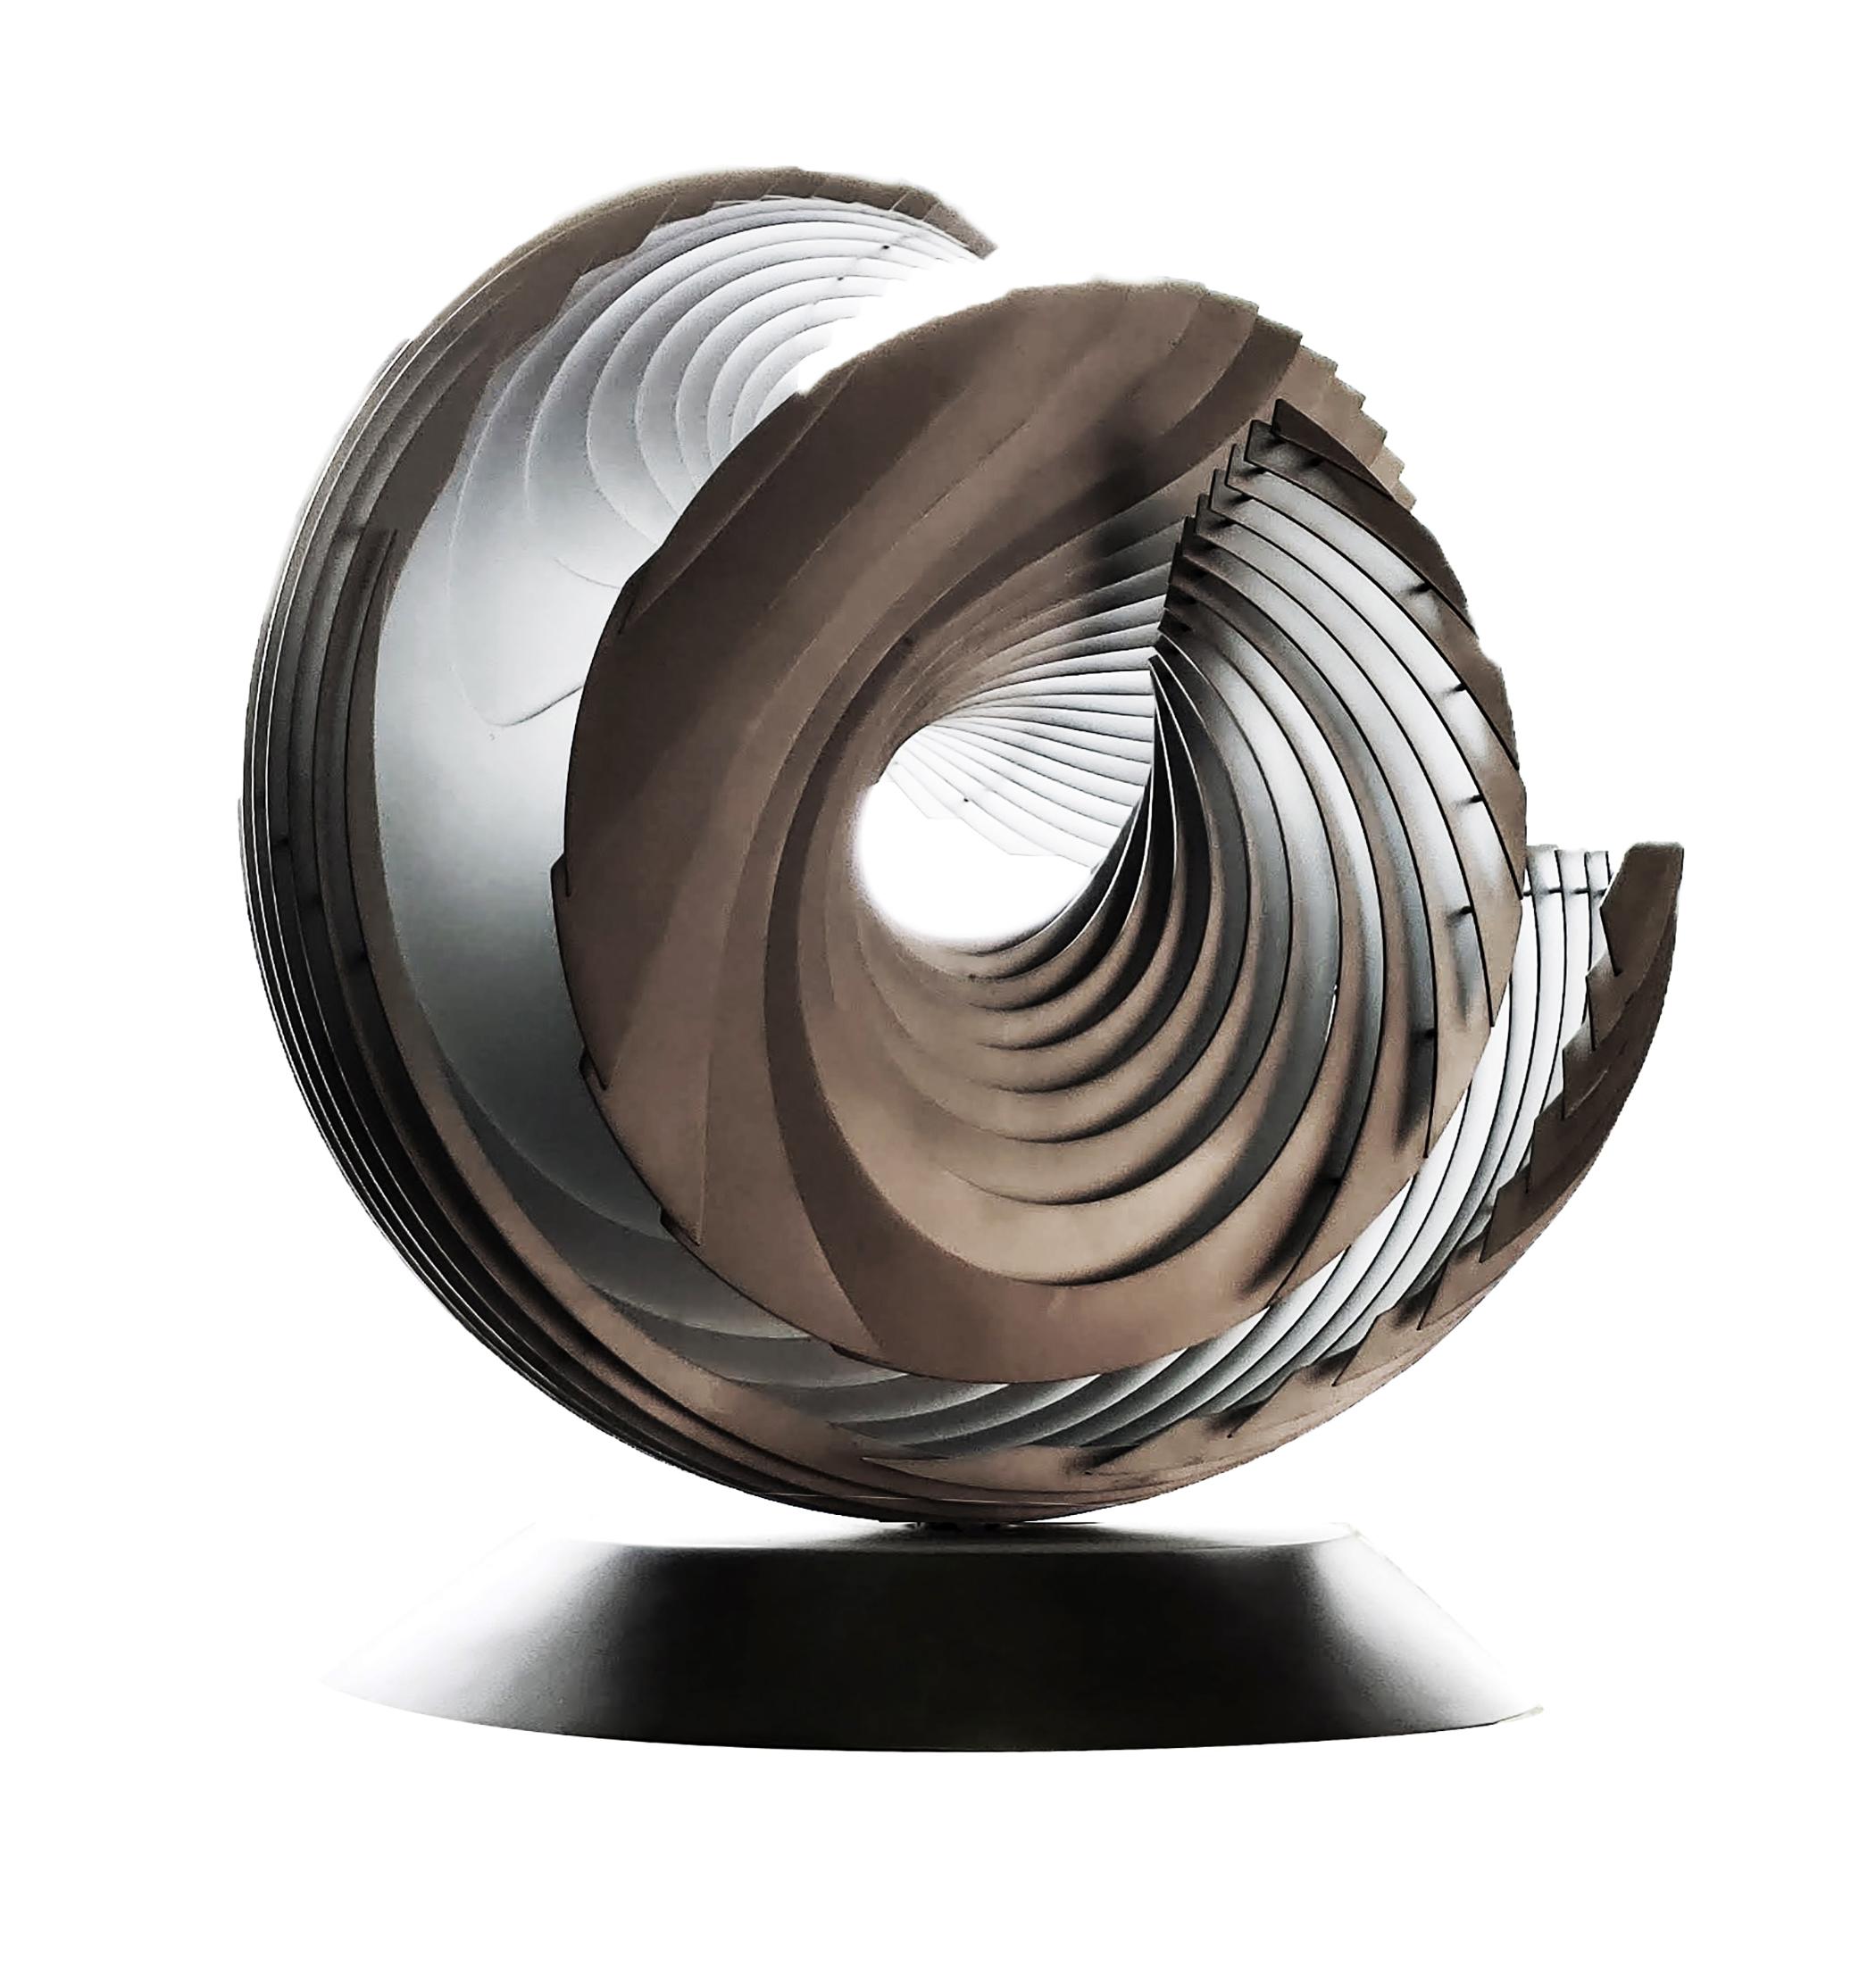 Lyle London Abstract Sculpture - WHORL